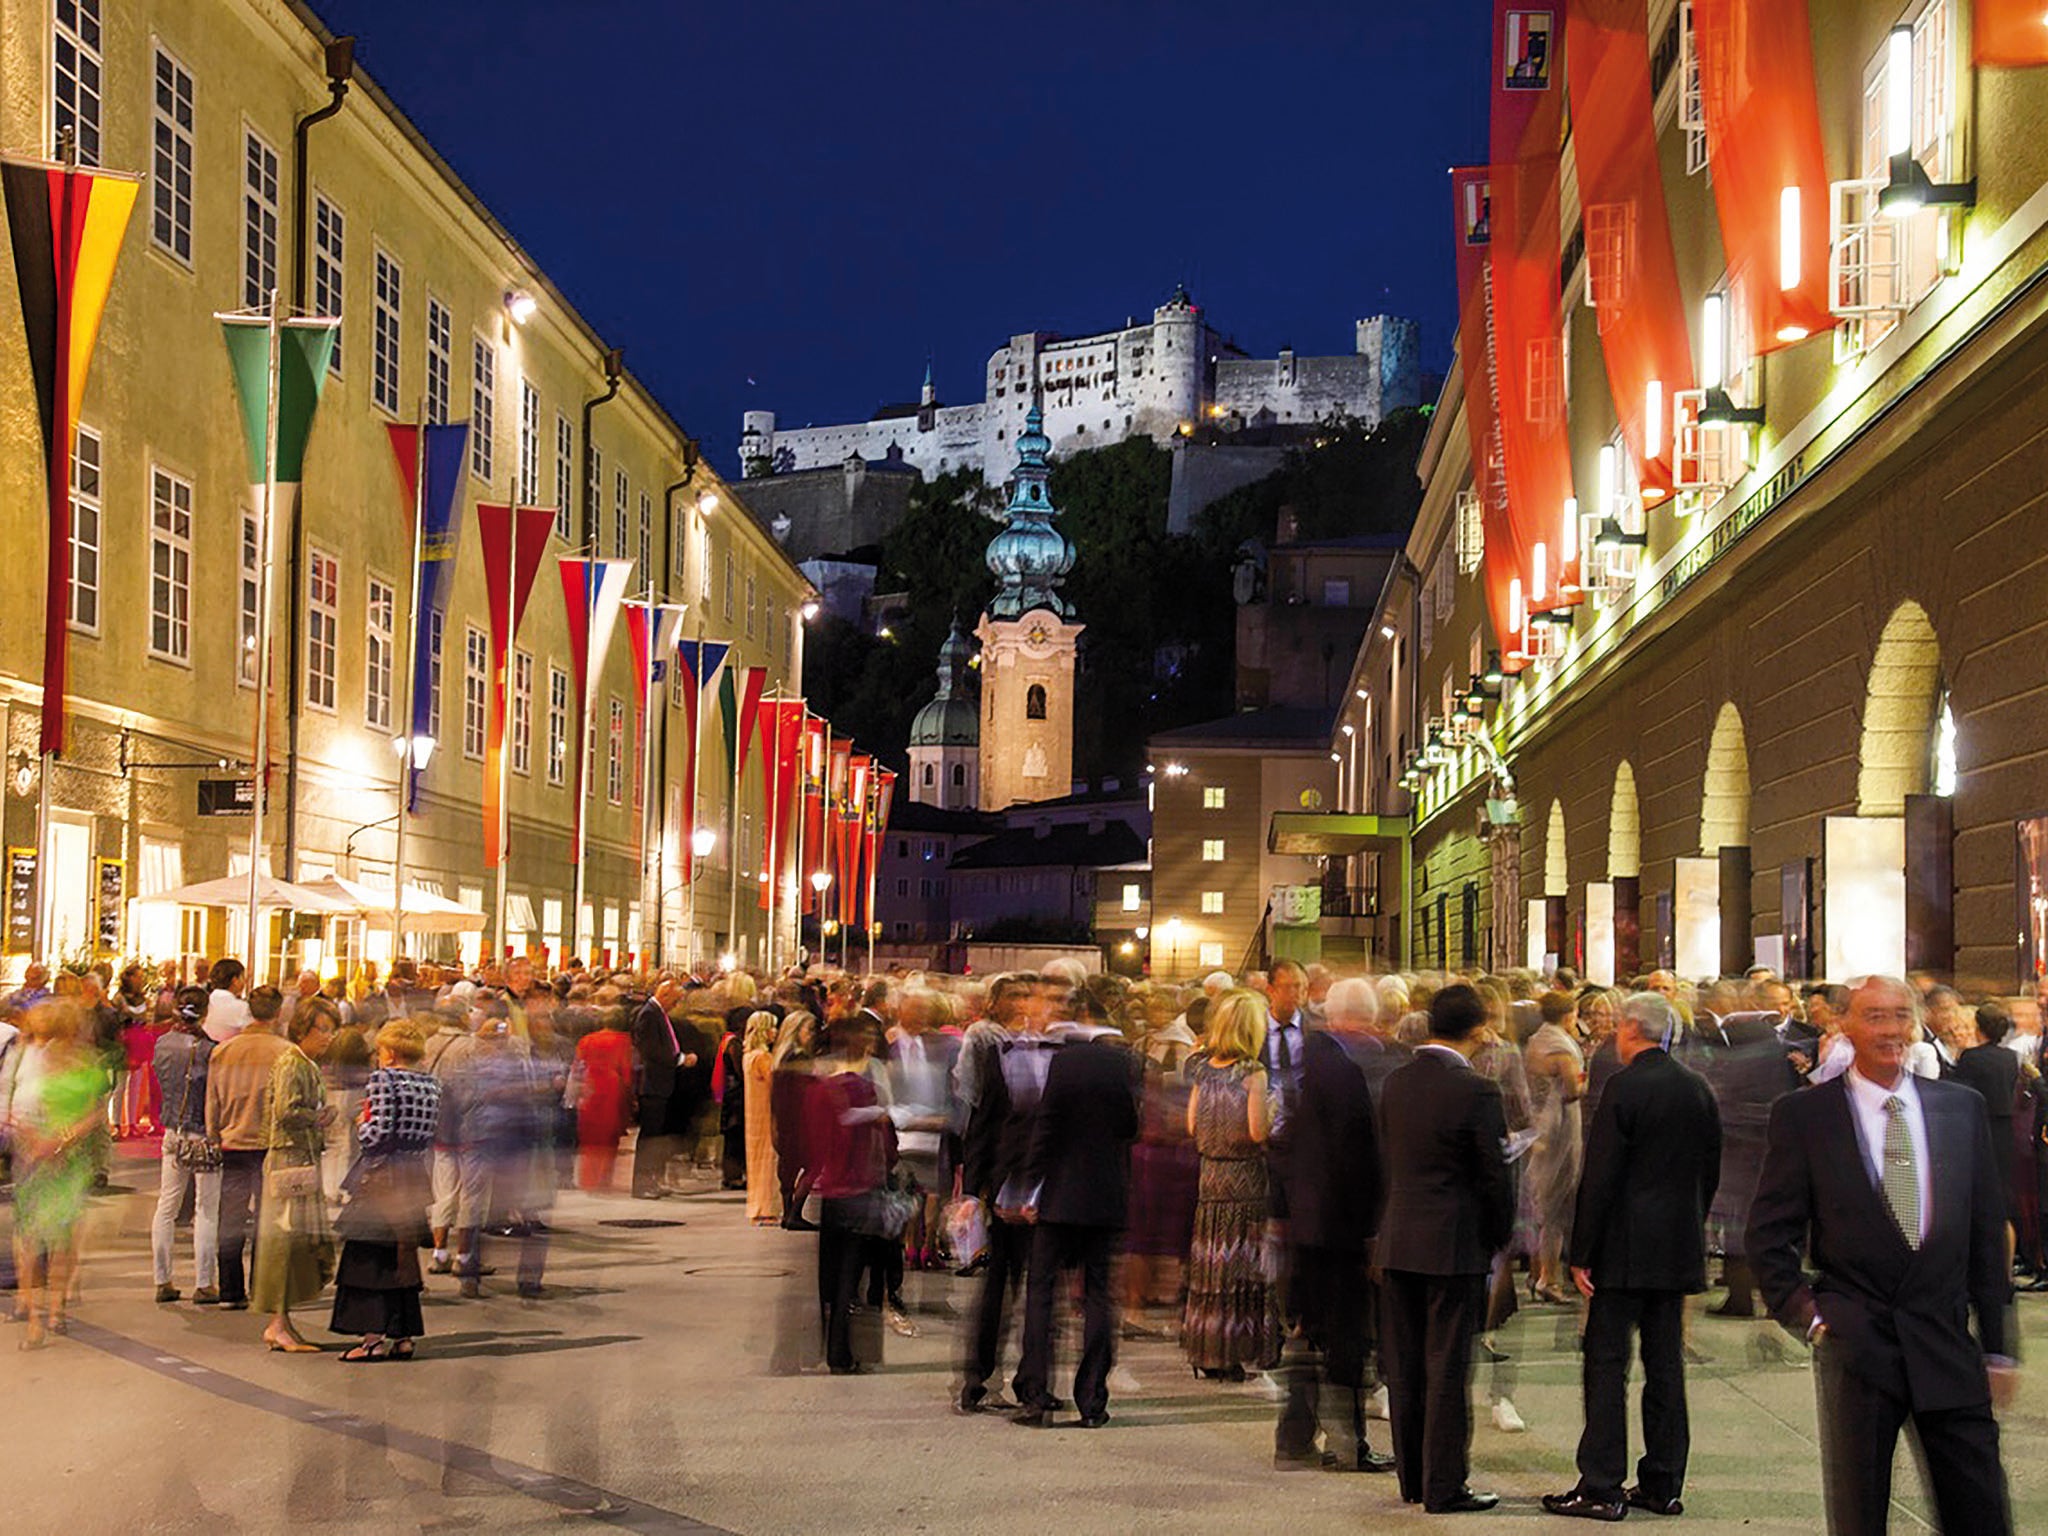 The story of the Salzburg festival that inspired Edinburgh | The Independent